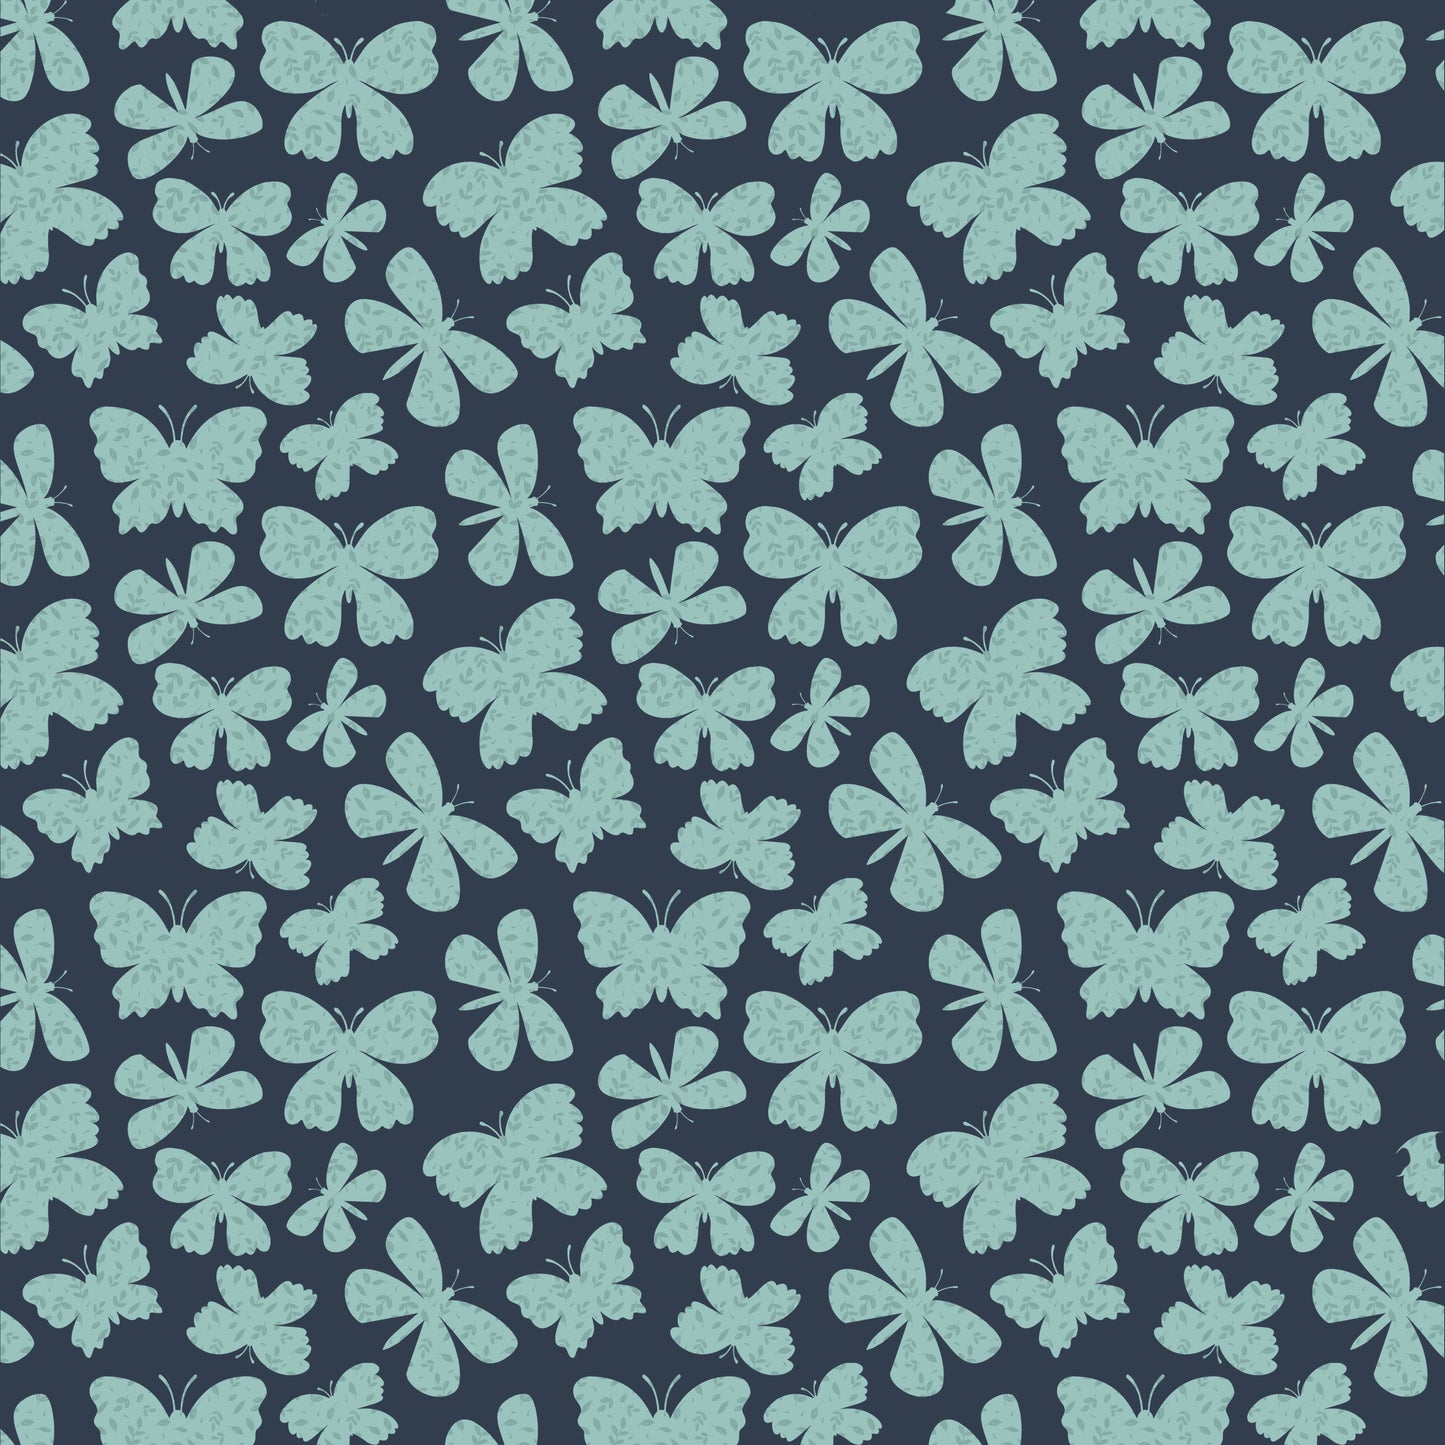 SCATTERED BUTTERFLIES NAVY - Painted Blossoms